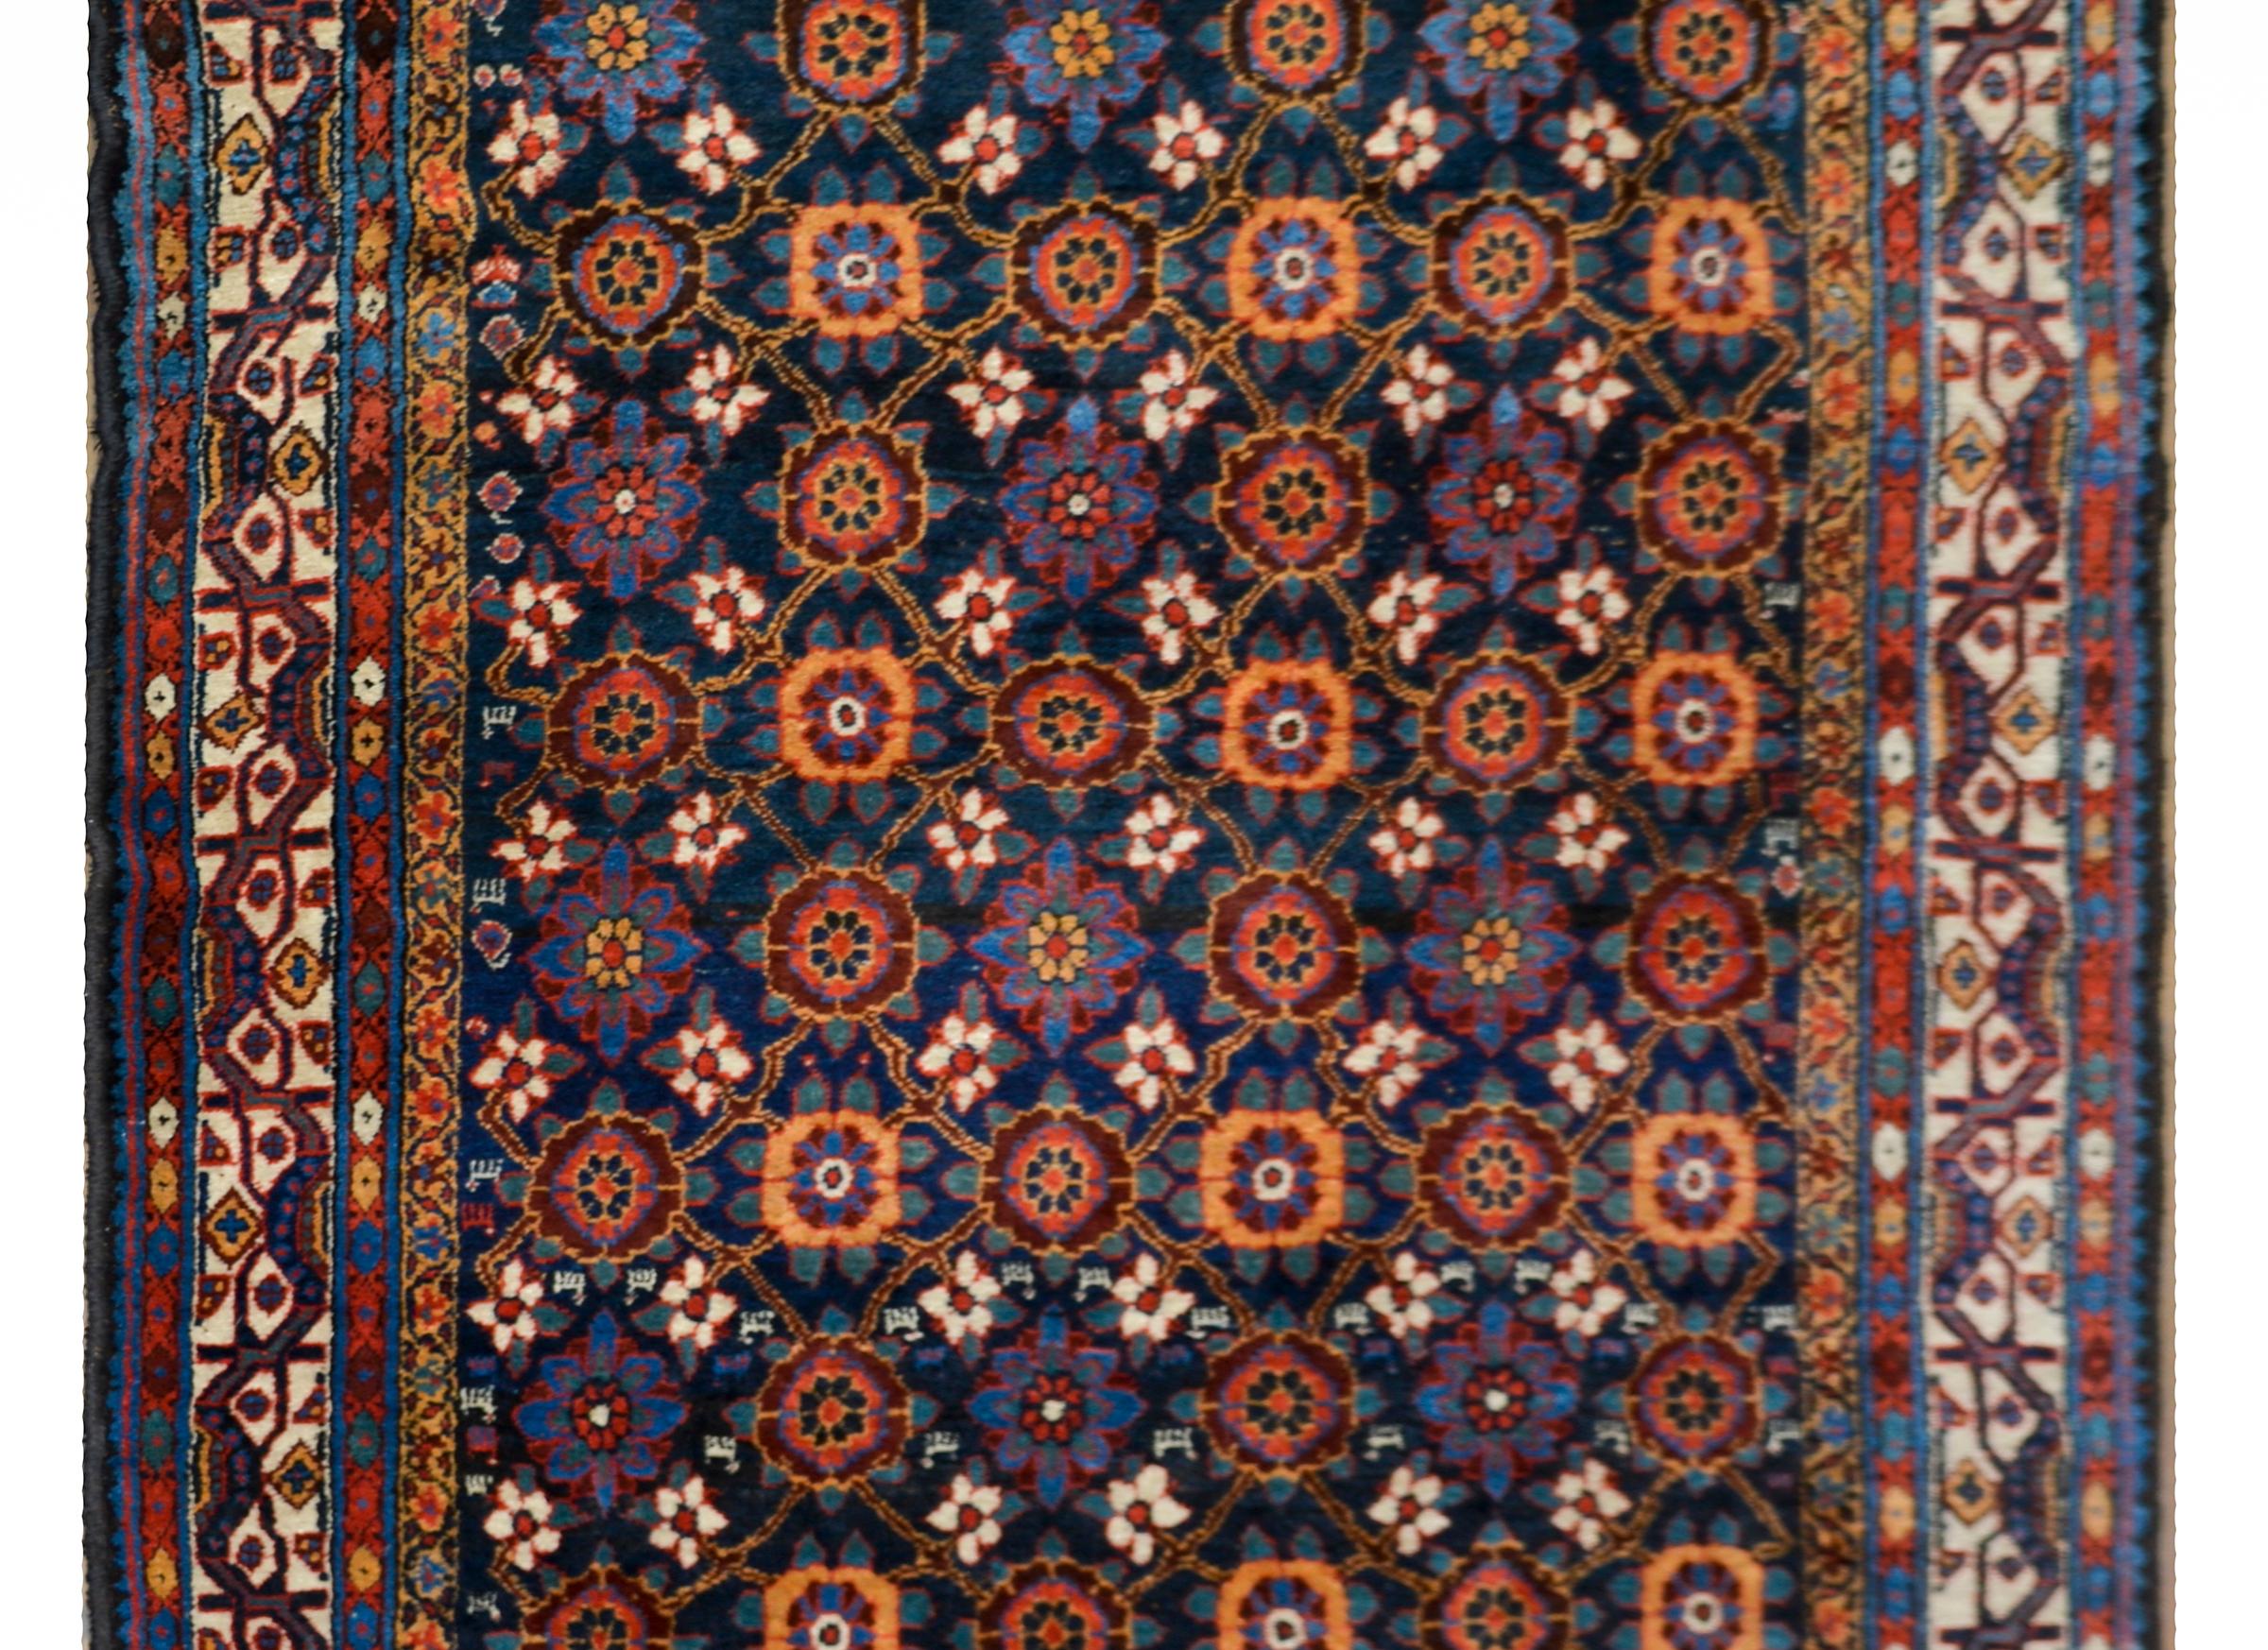 A stunning early 20th century Persian Afshar rug with an all-over floral trellis pattern woven in brilliant reds, greens, yellows, and blues, and surrounded by a wide border containing a scrolling vine pattern flanked by pairs of matching petite